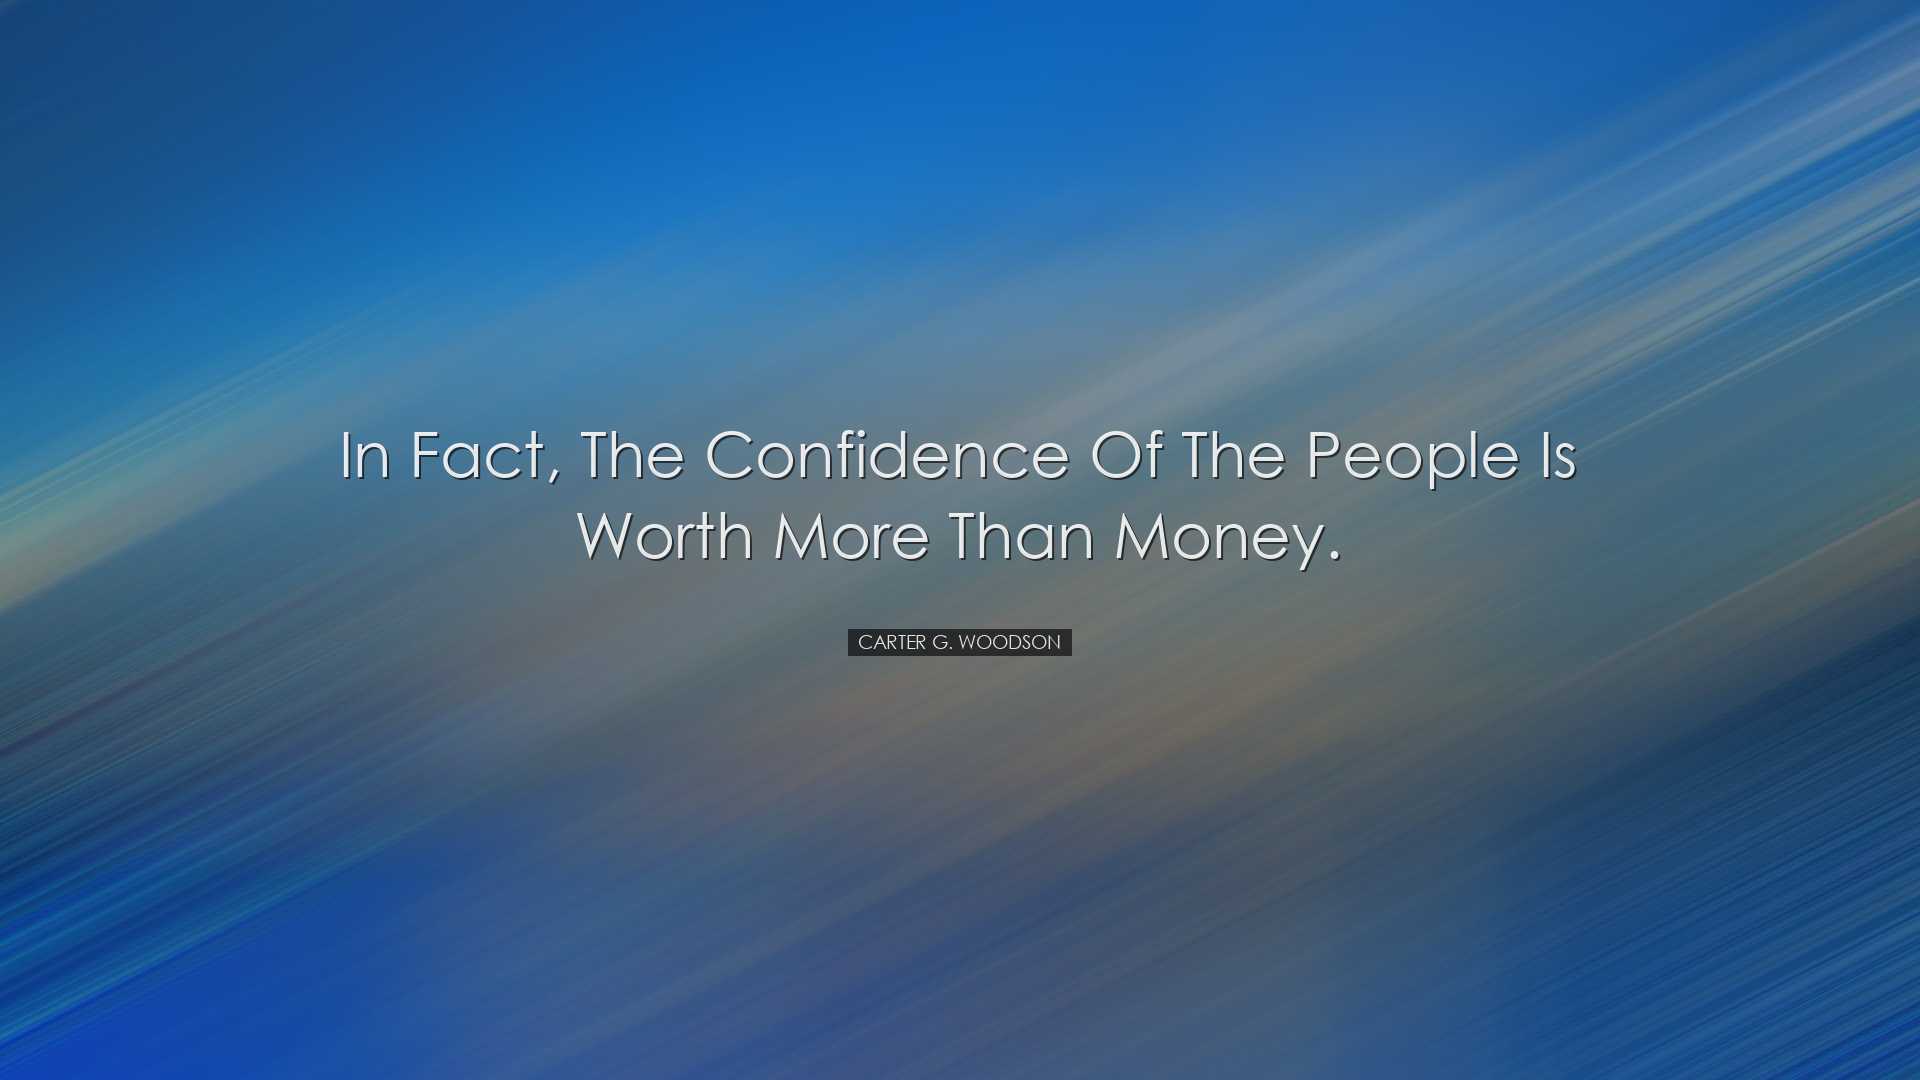 In fact, the confidence of the people is worth more than money. -